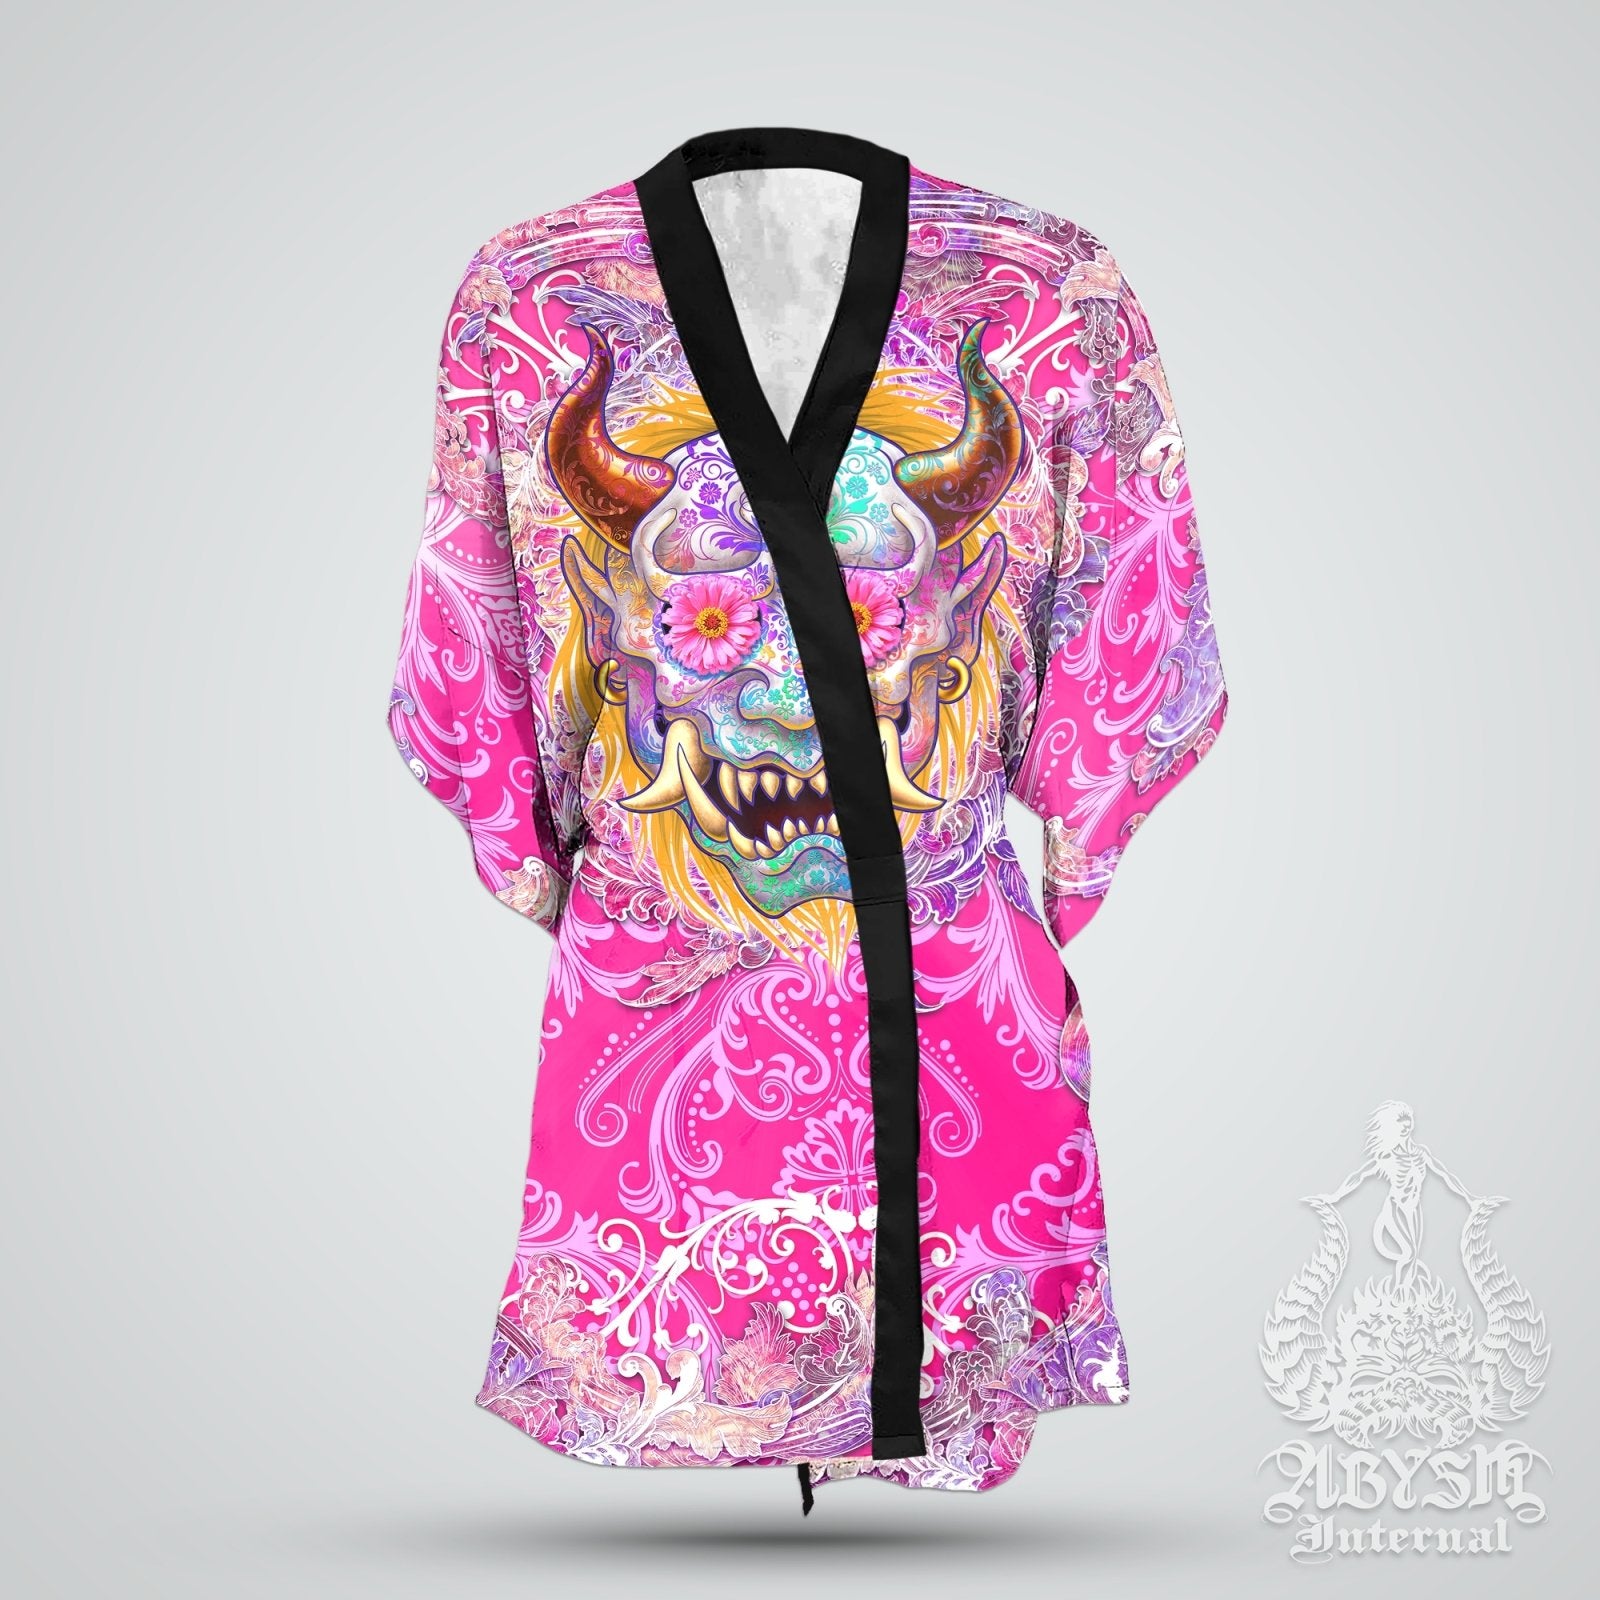 Demon Cover Up, Beach Outfit, Oni Party Kimono, Japanese Summer Festival Robe, Indie and Alternative Clothing, Unisex - Psy - Abysm Internal